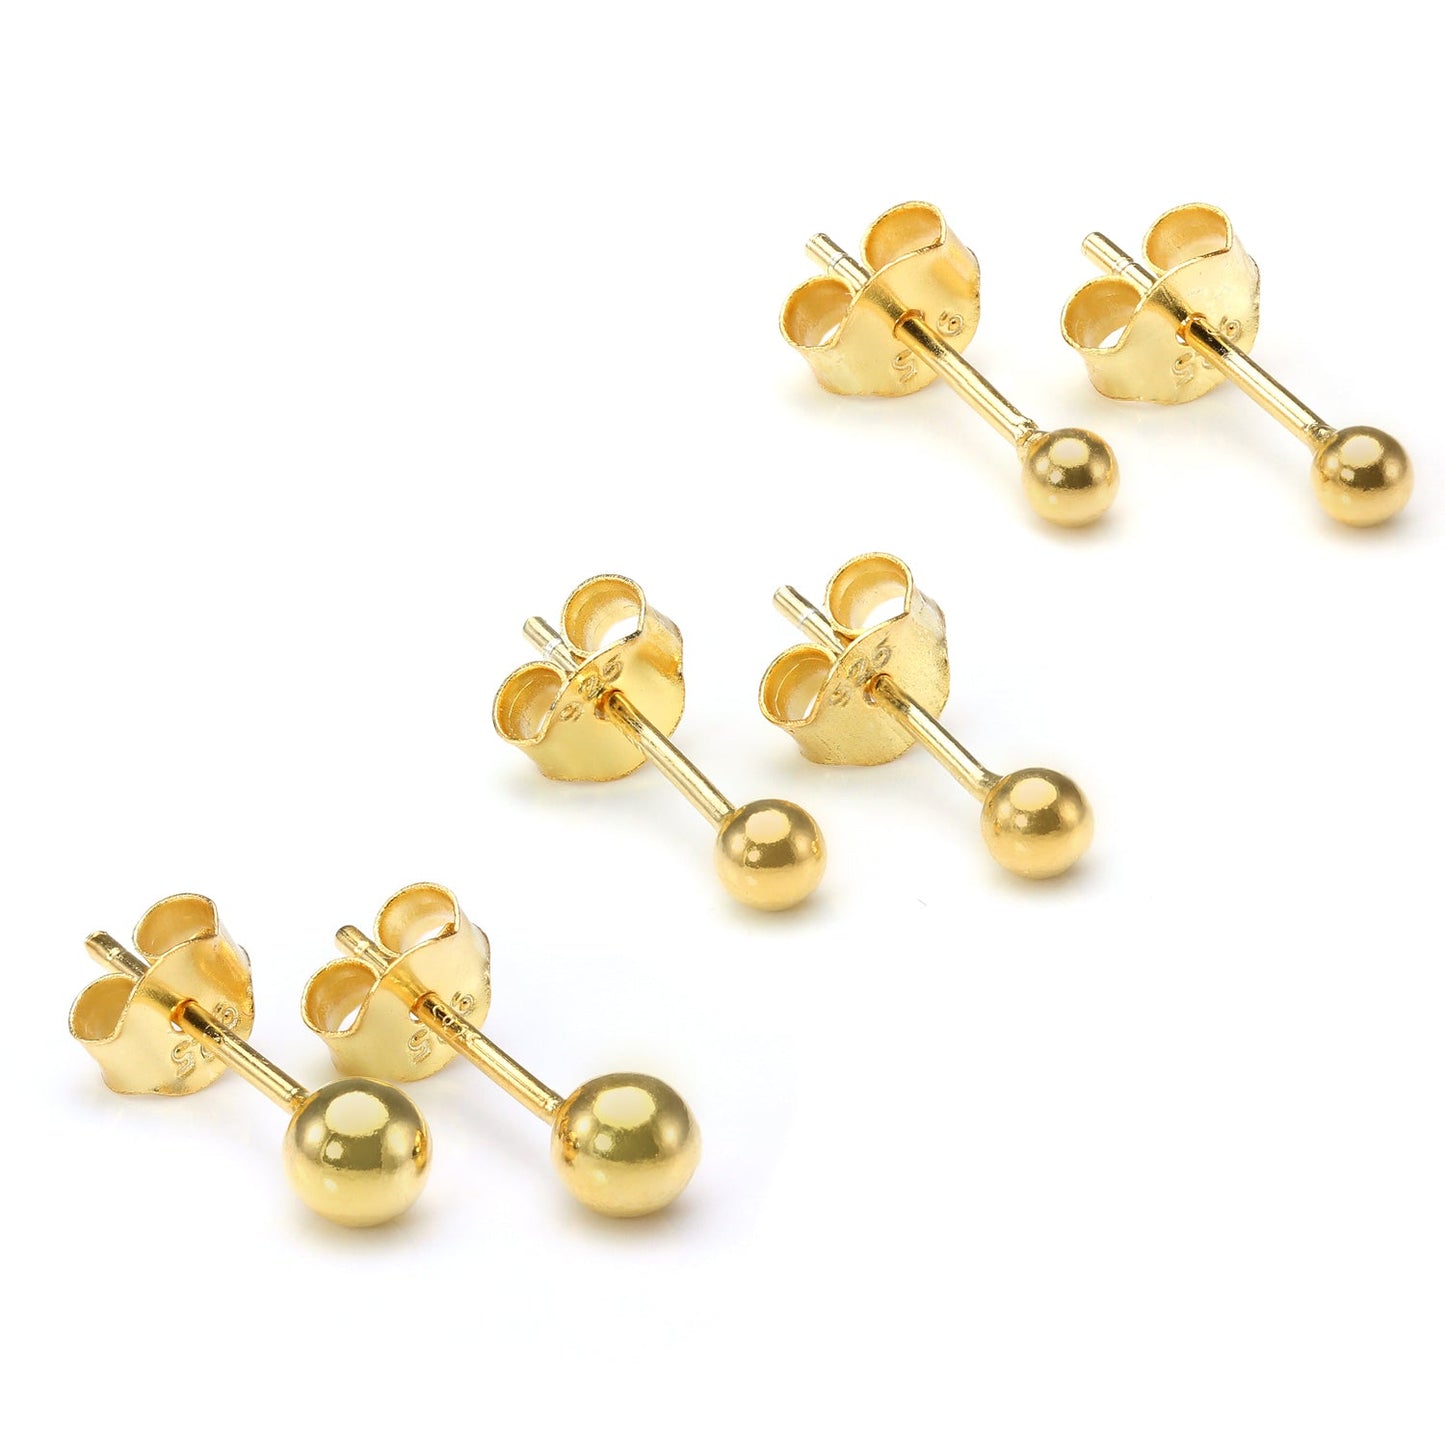 Gold Plated Small Sterling Silver Ball Stud Earrings 2mm - 6mm & Packs